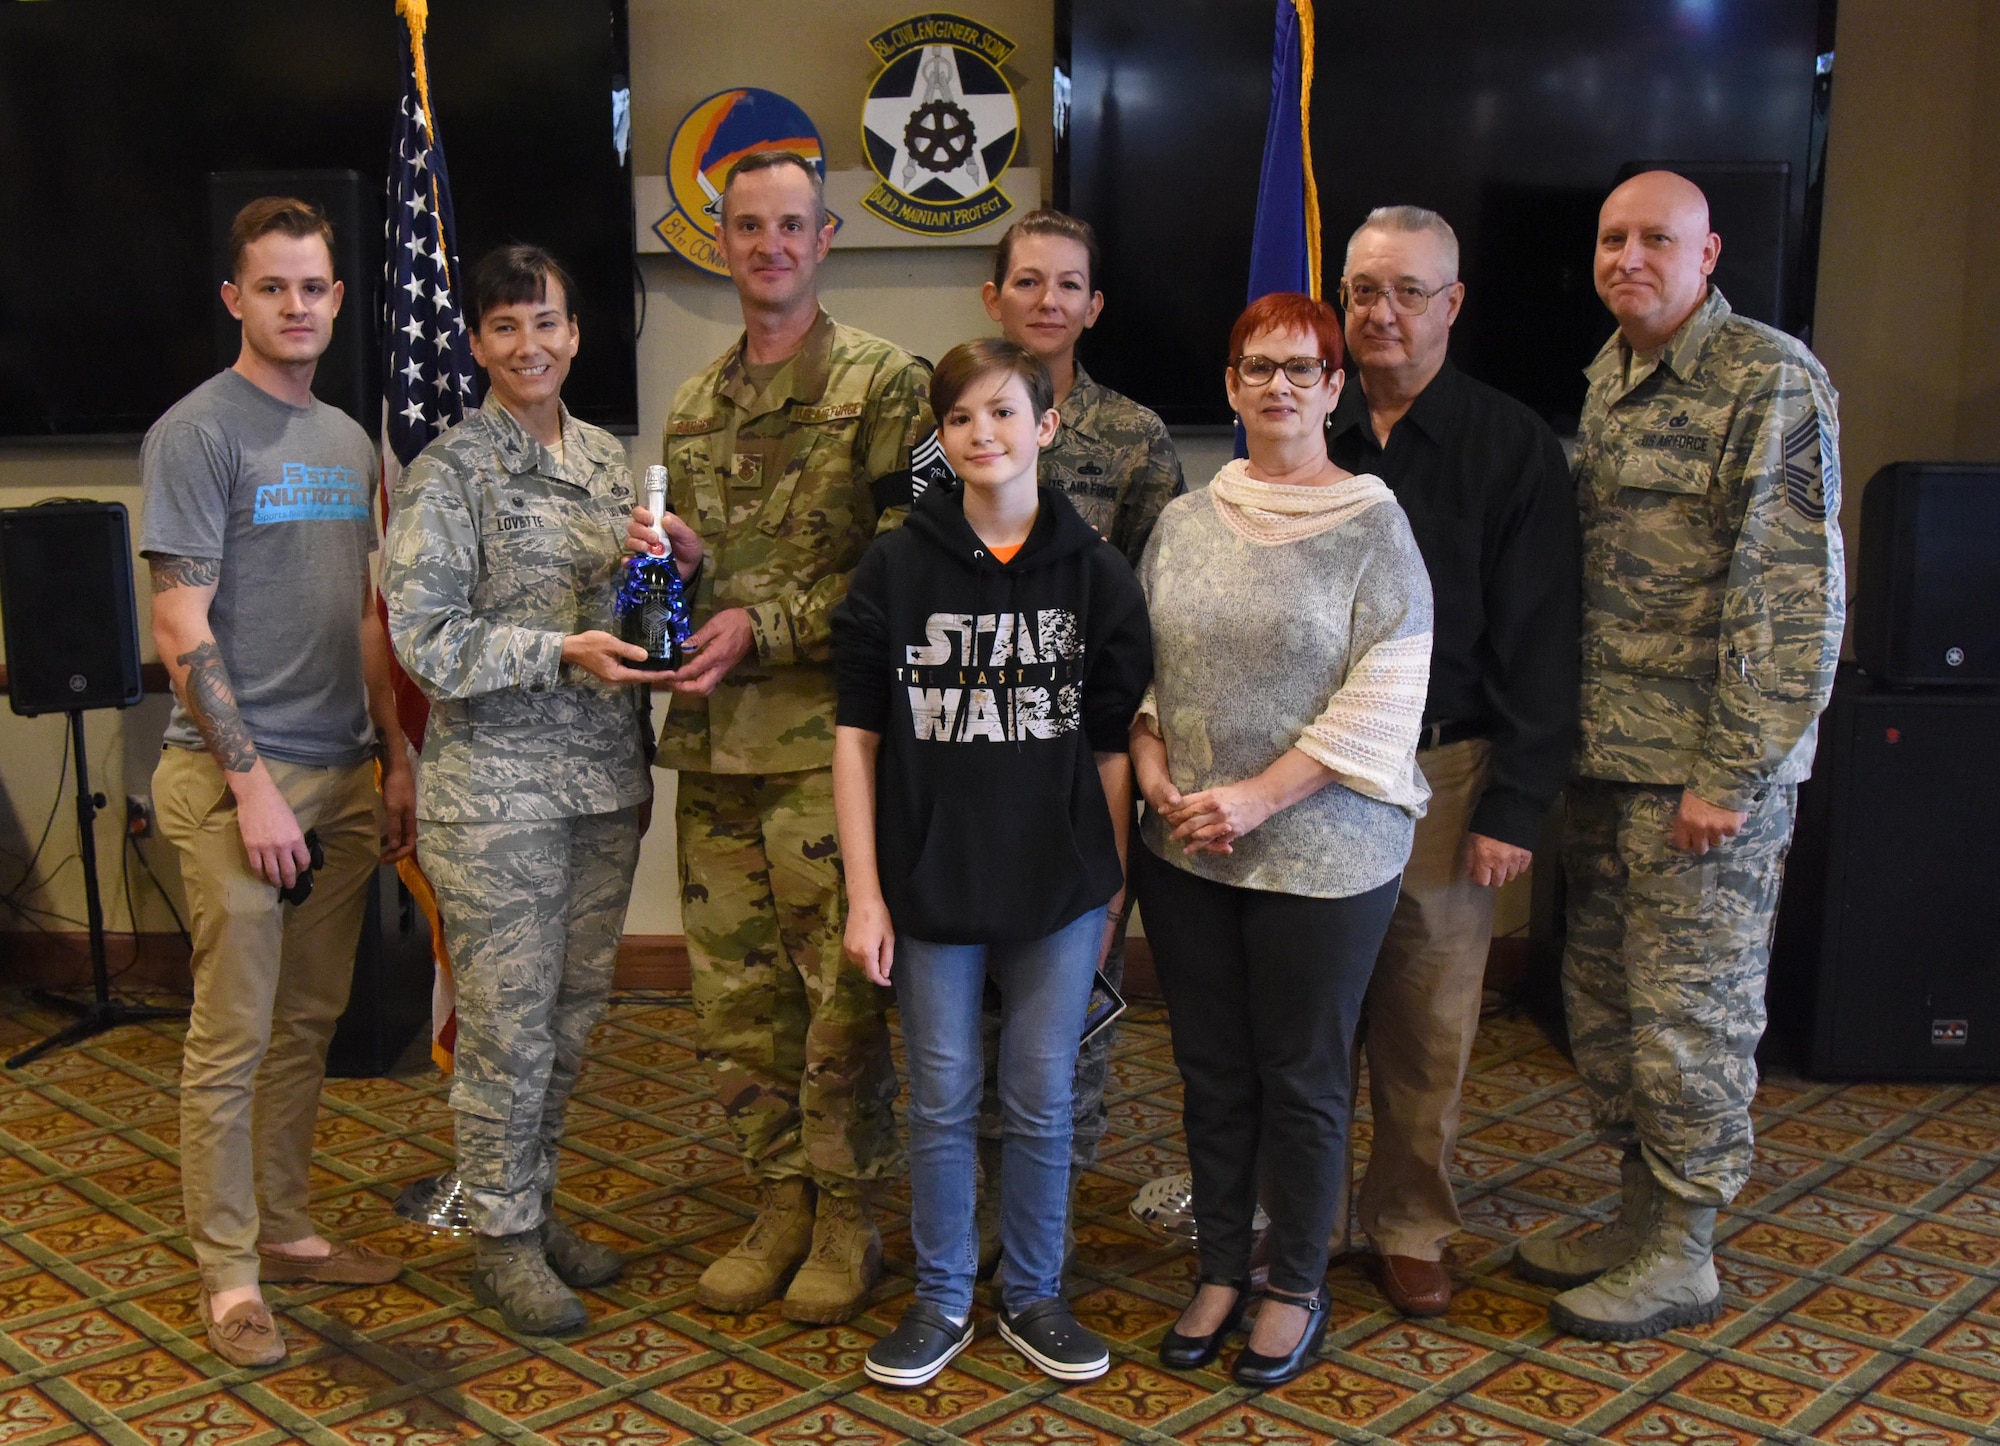 U.S. Air Force Col. Debra Lovette, 81st Training Wing commander, and Chief Master Sgt. David Pizzuto, 81st TRW command chief, presents Senior Master Sgt. Charles Sargent, 338th Training Squadron flight chief, and his family with a memento for his promotion to the rank of chief master sergeant at Keesler Air Force Base, Mississippi, Dec. 6, 2018. Five senior master sgts. at Keesler were selected for promotion. (U.S. Air Force photo by Kemberly Groue)